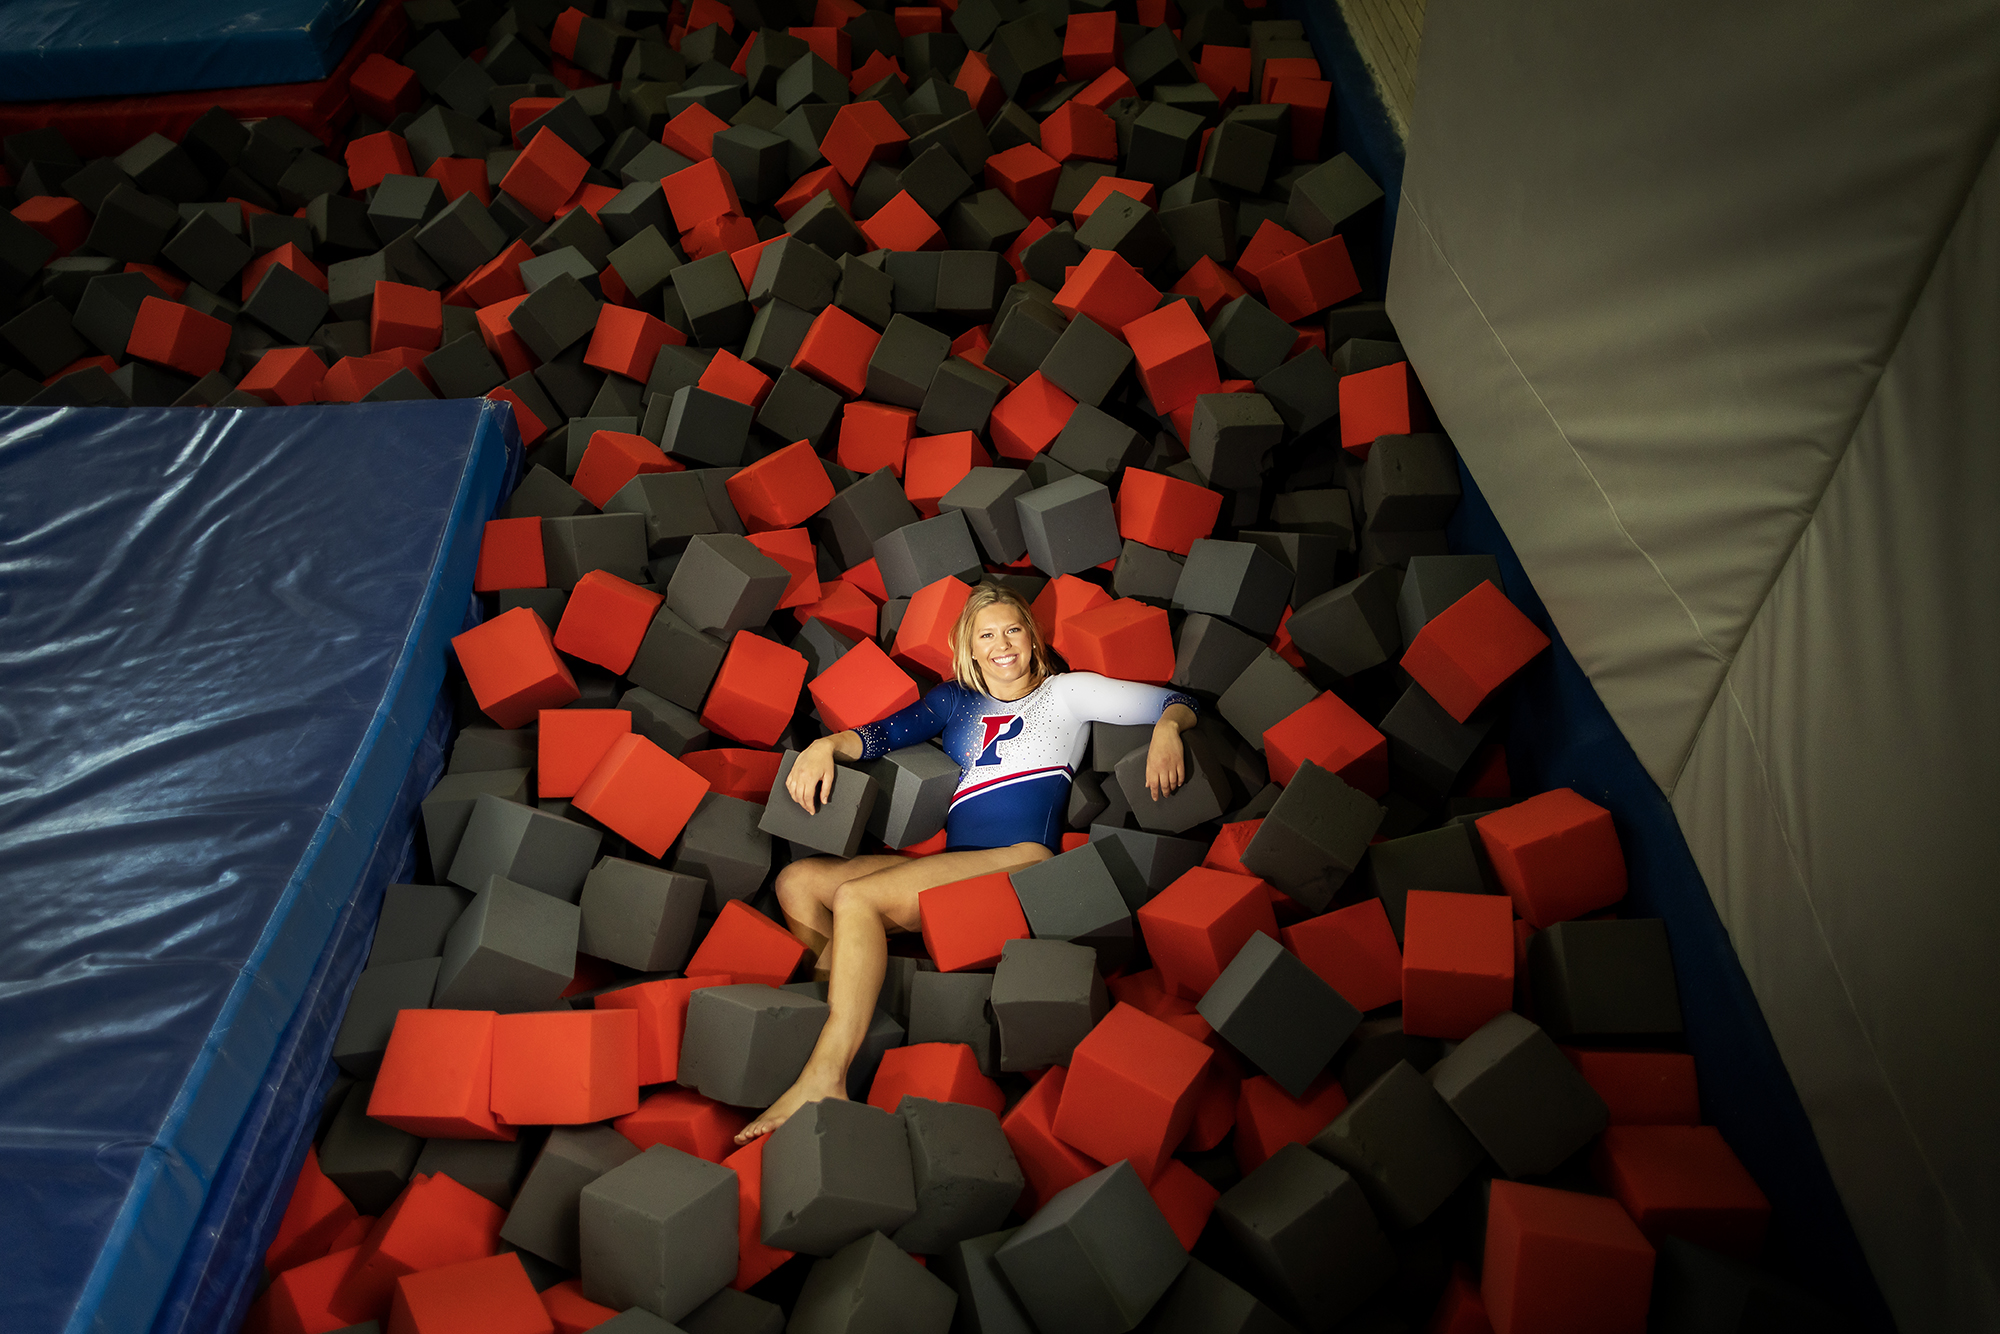 McCaleigh Marr, wearing her Penn leotard, lies in a pile of foam squares, next to a mat.